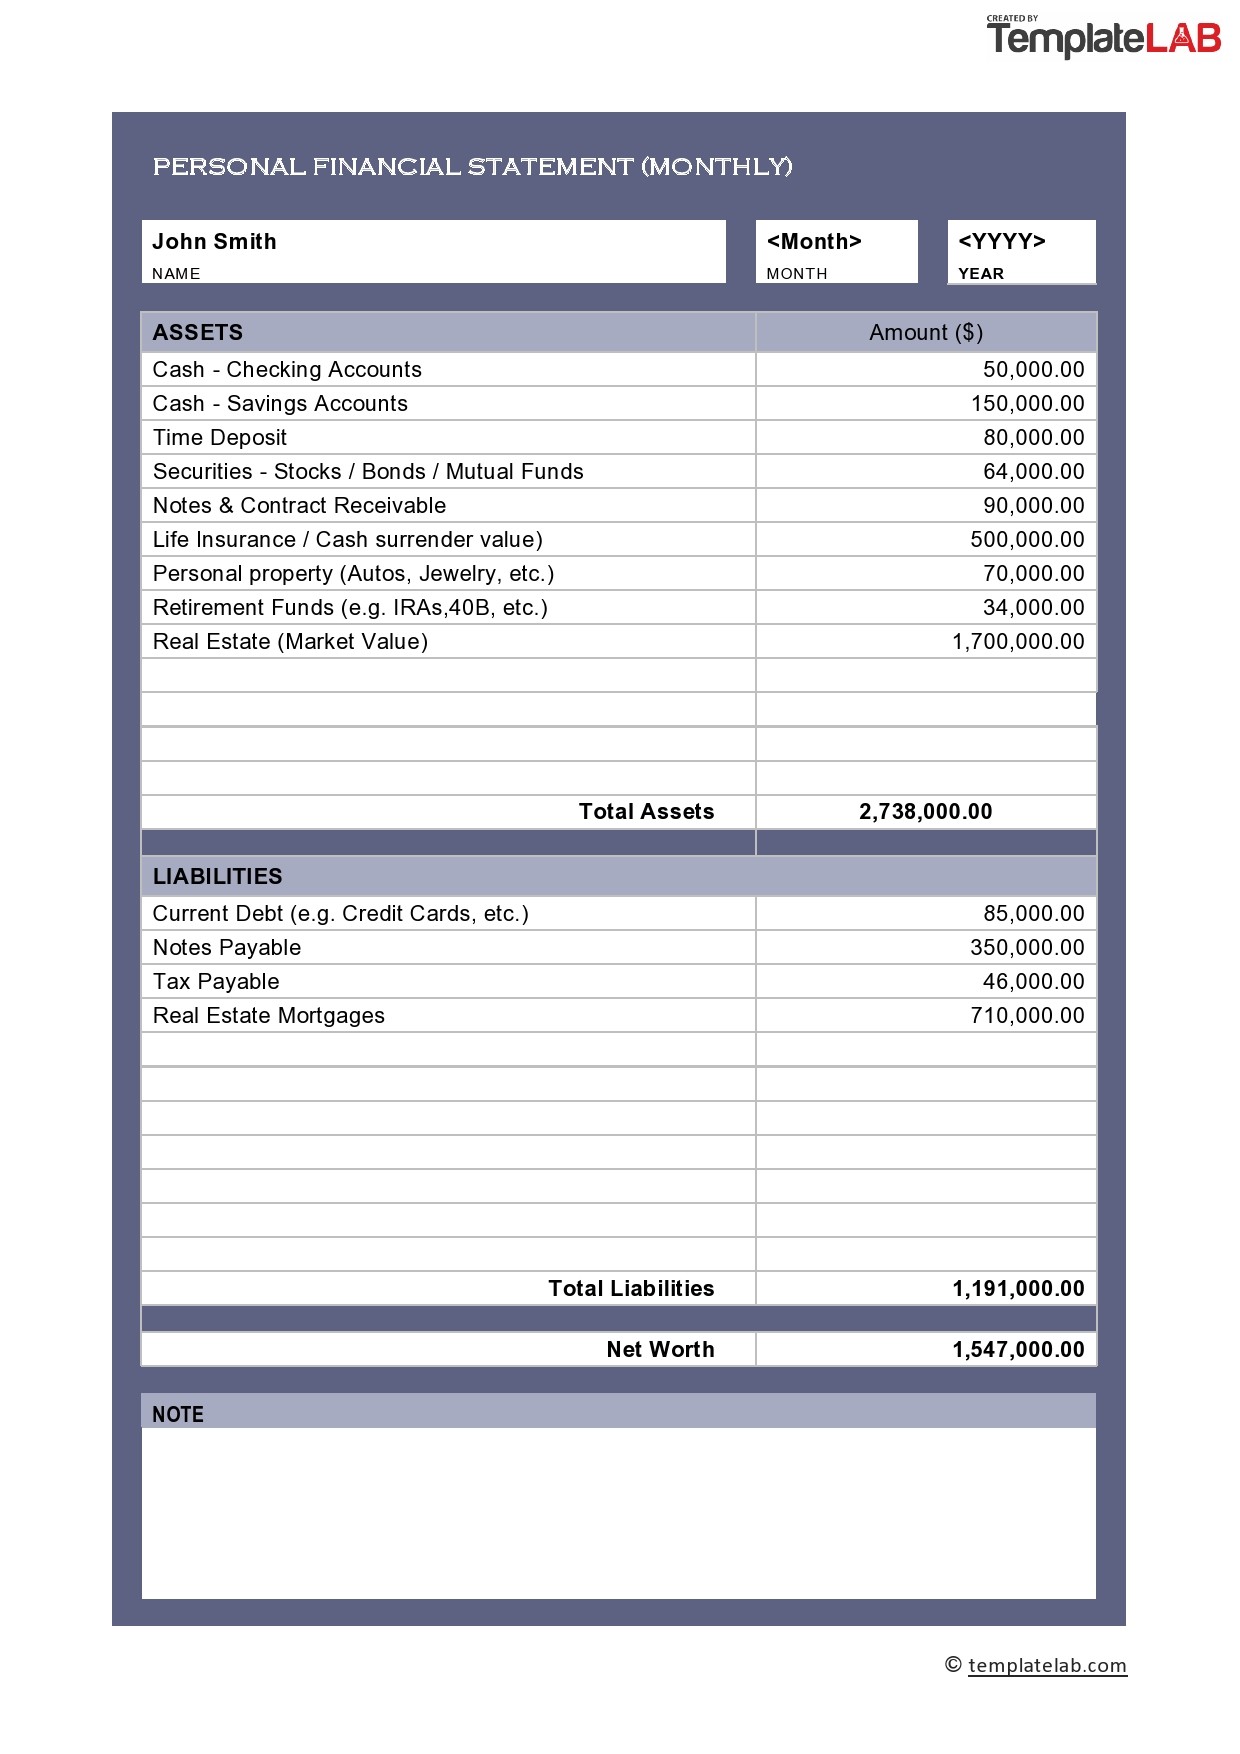 40+ Personal Financial Statement Templates & Forms ᐅ TemplateLab